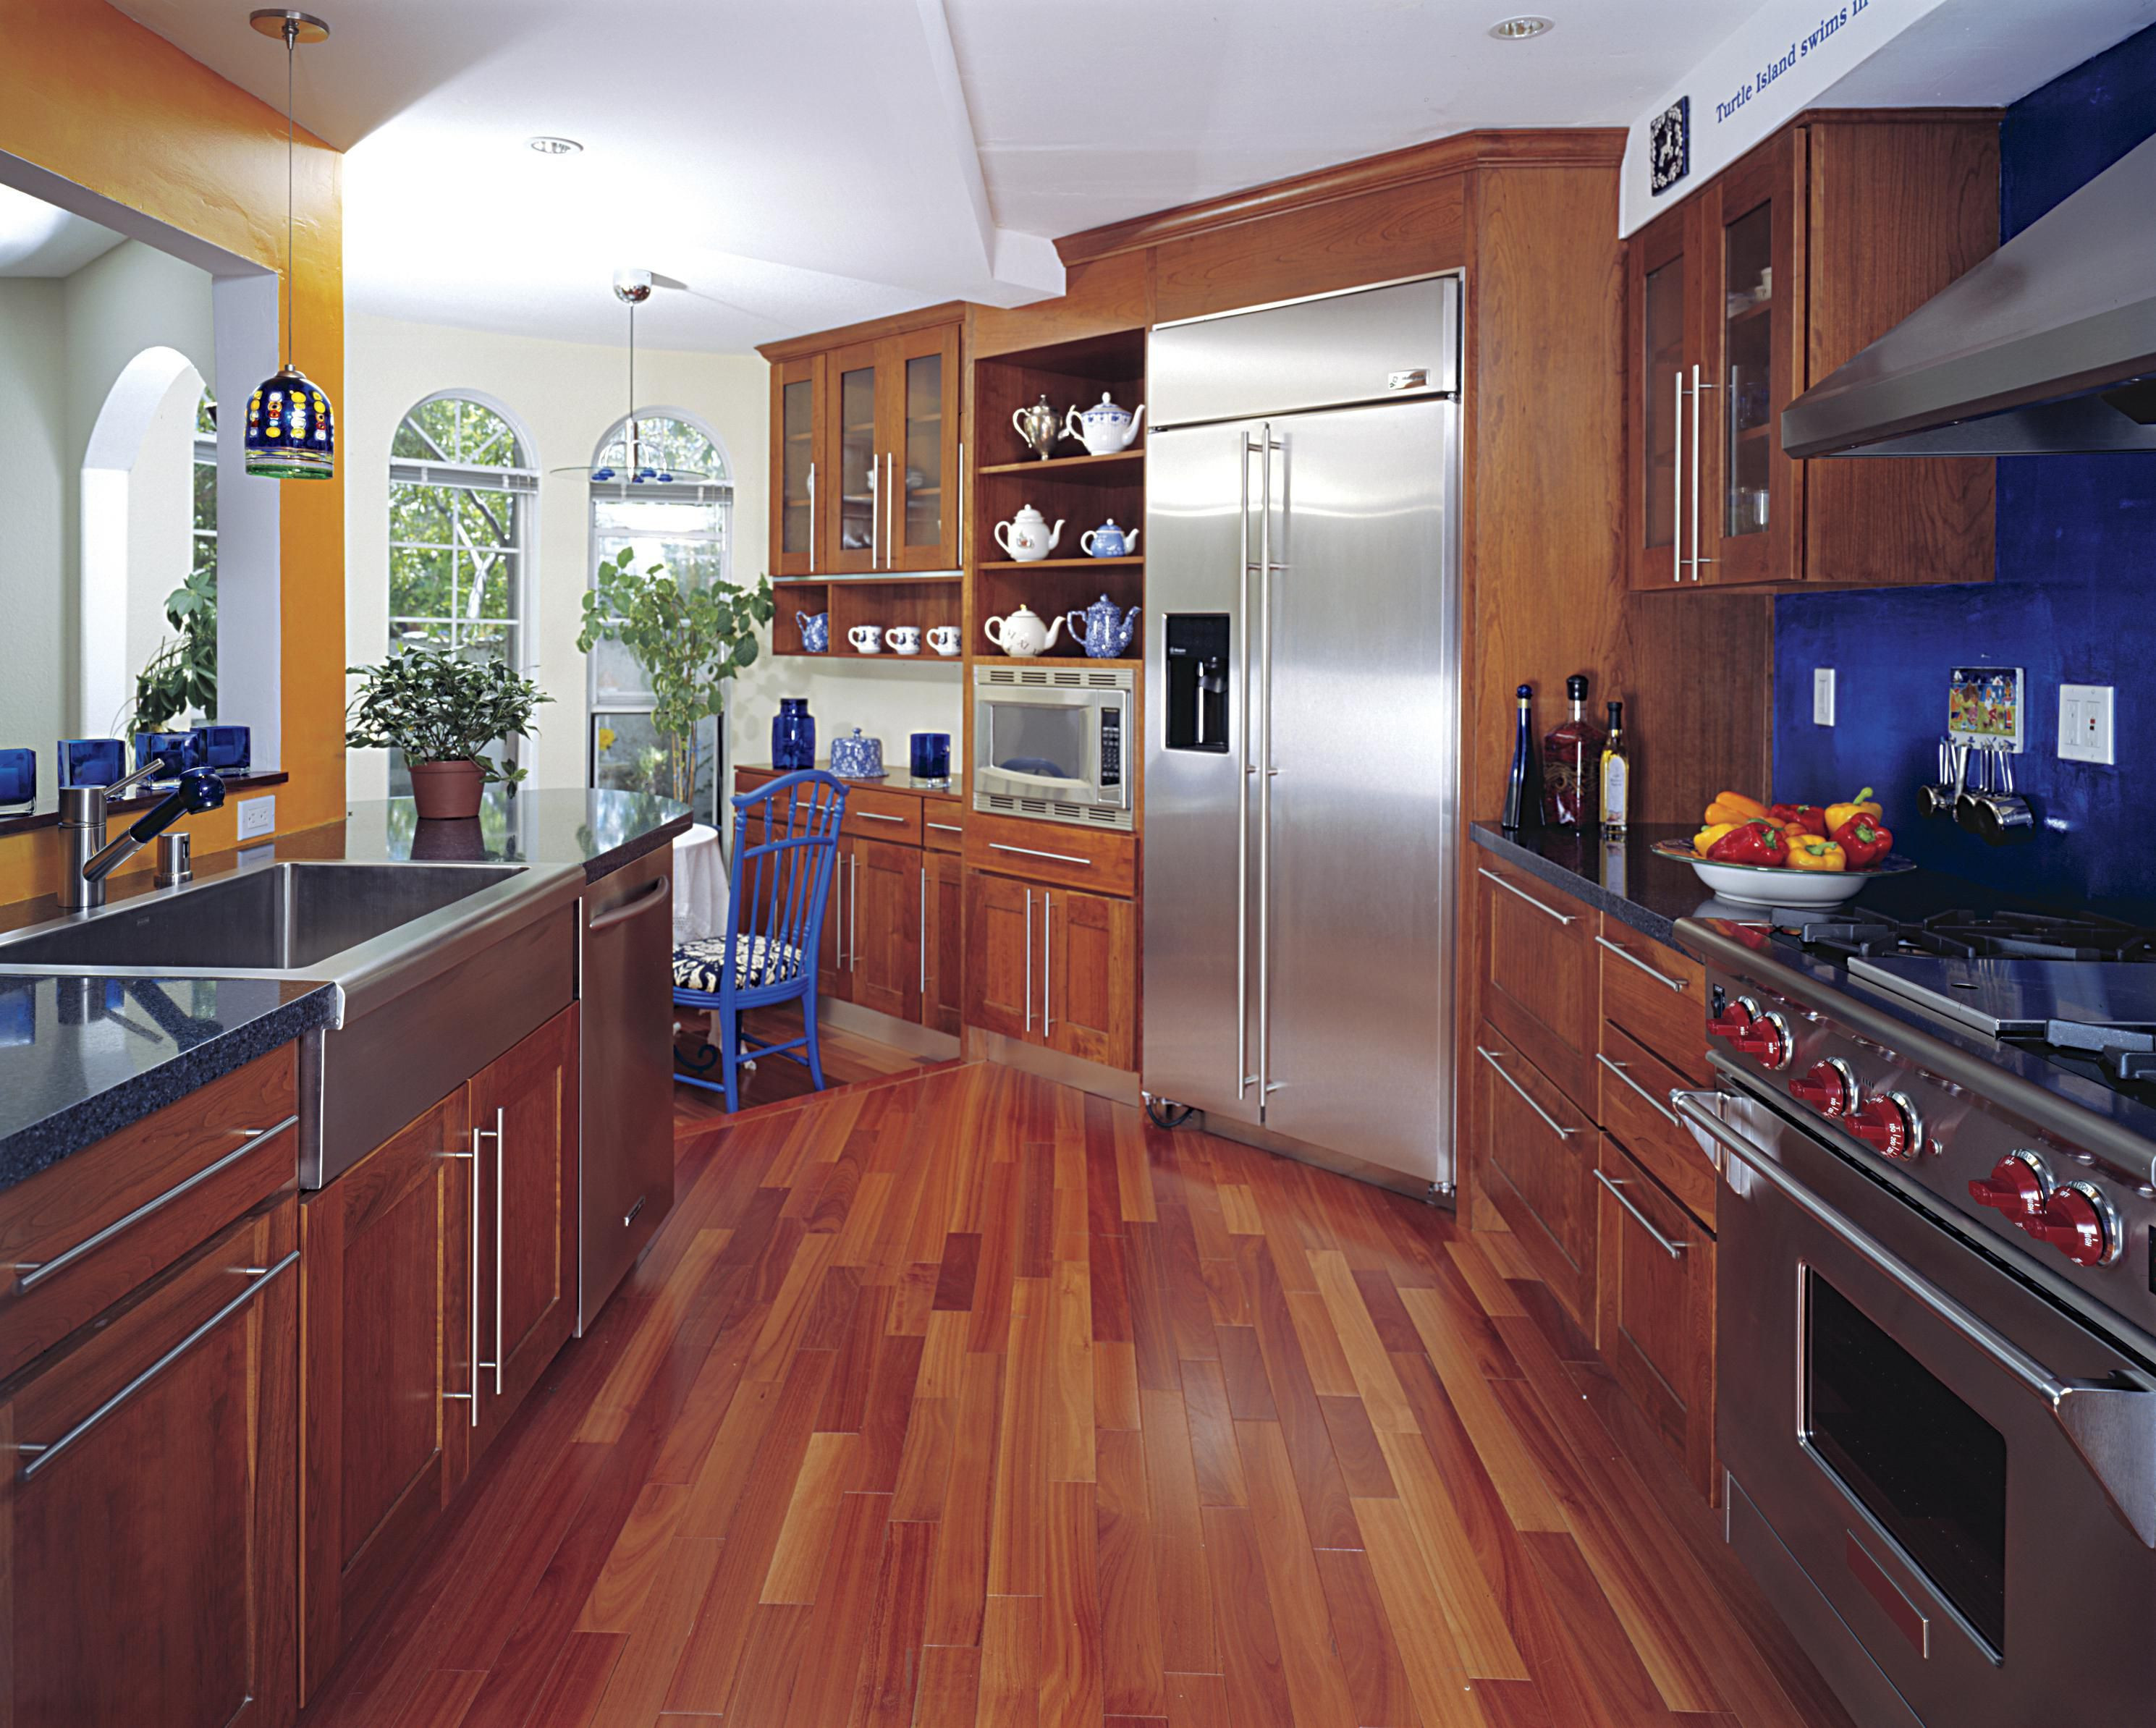 10 Cute Hardwood Floor Finishes Review 2024 free download hardwood floor finishes review of hardwood floor in a kitchen is this allowed regarding 186828472 56a49f3a5f9b58b7d0d7e142